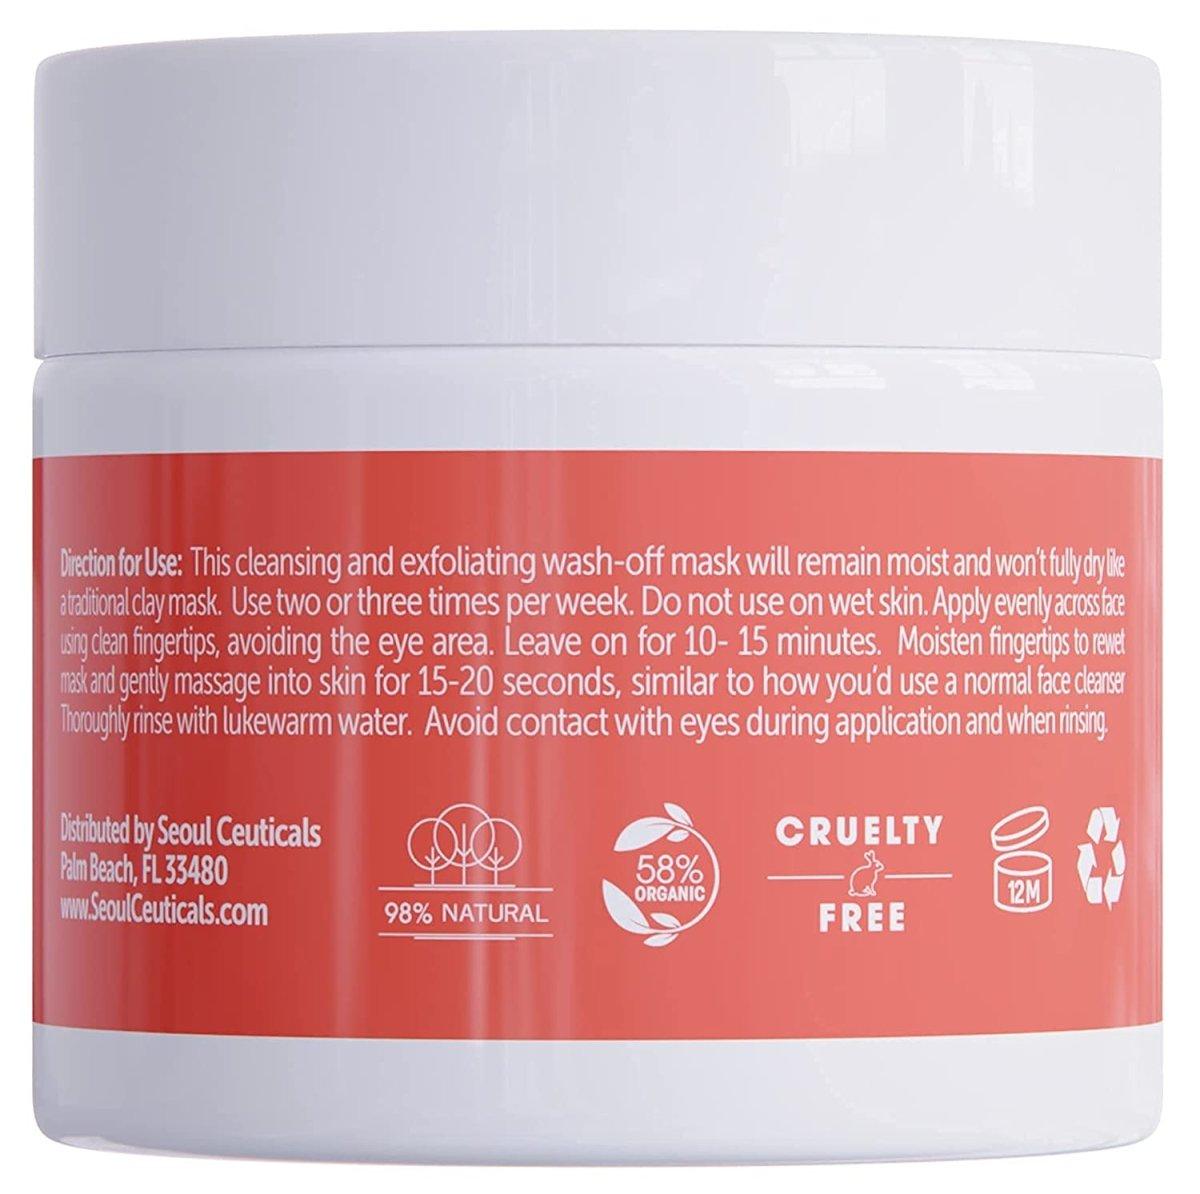 Exfoliating & Cleansing Face Mask - SeoulCeuticals